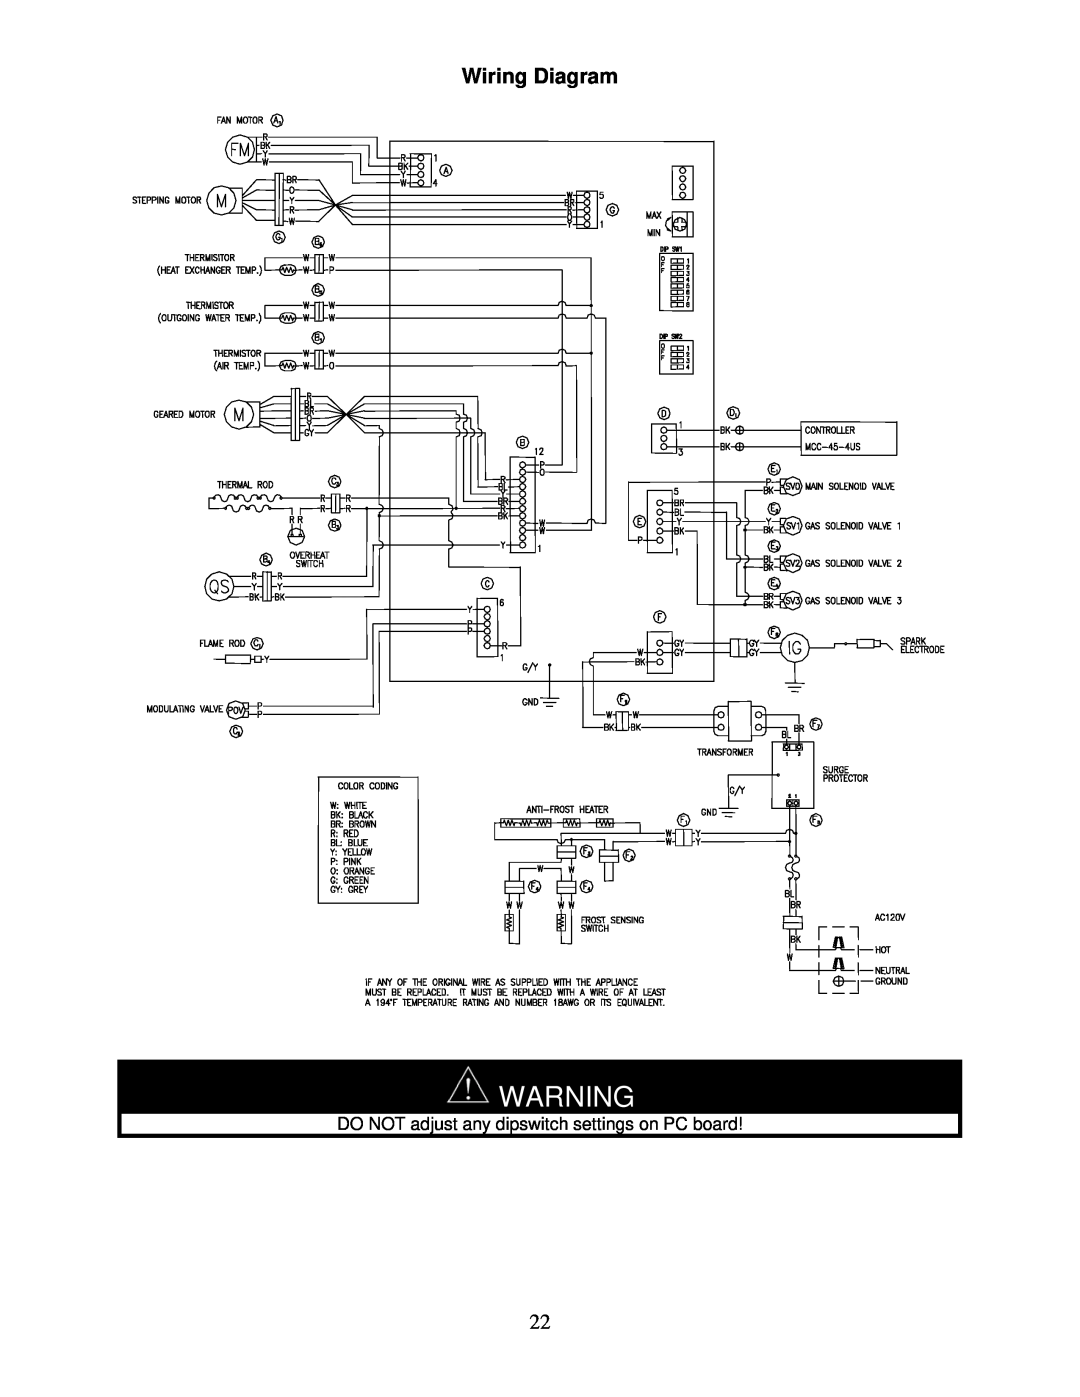 Bradford-White Corp IGE-199R Series, IGE-199C Series Wiring Diagram, DO NOT adjust any dipswitch settings on PC board 